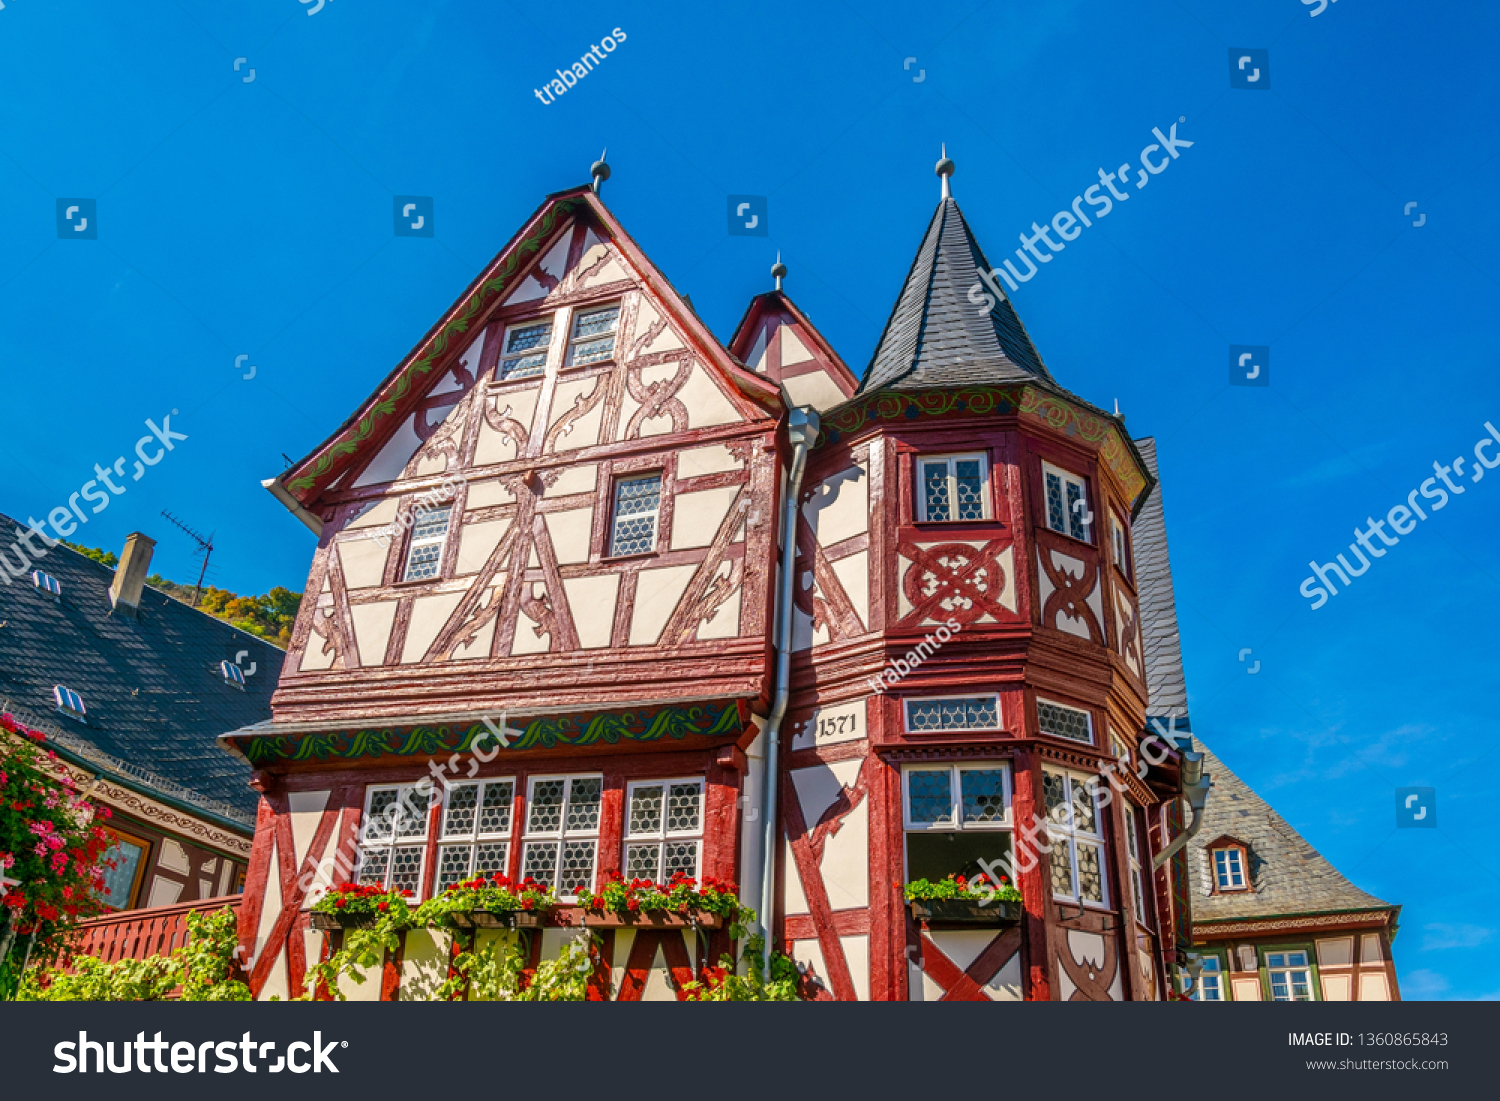 Timber facades in Bacharach, Germany #1360865843